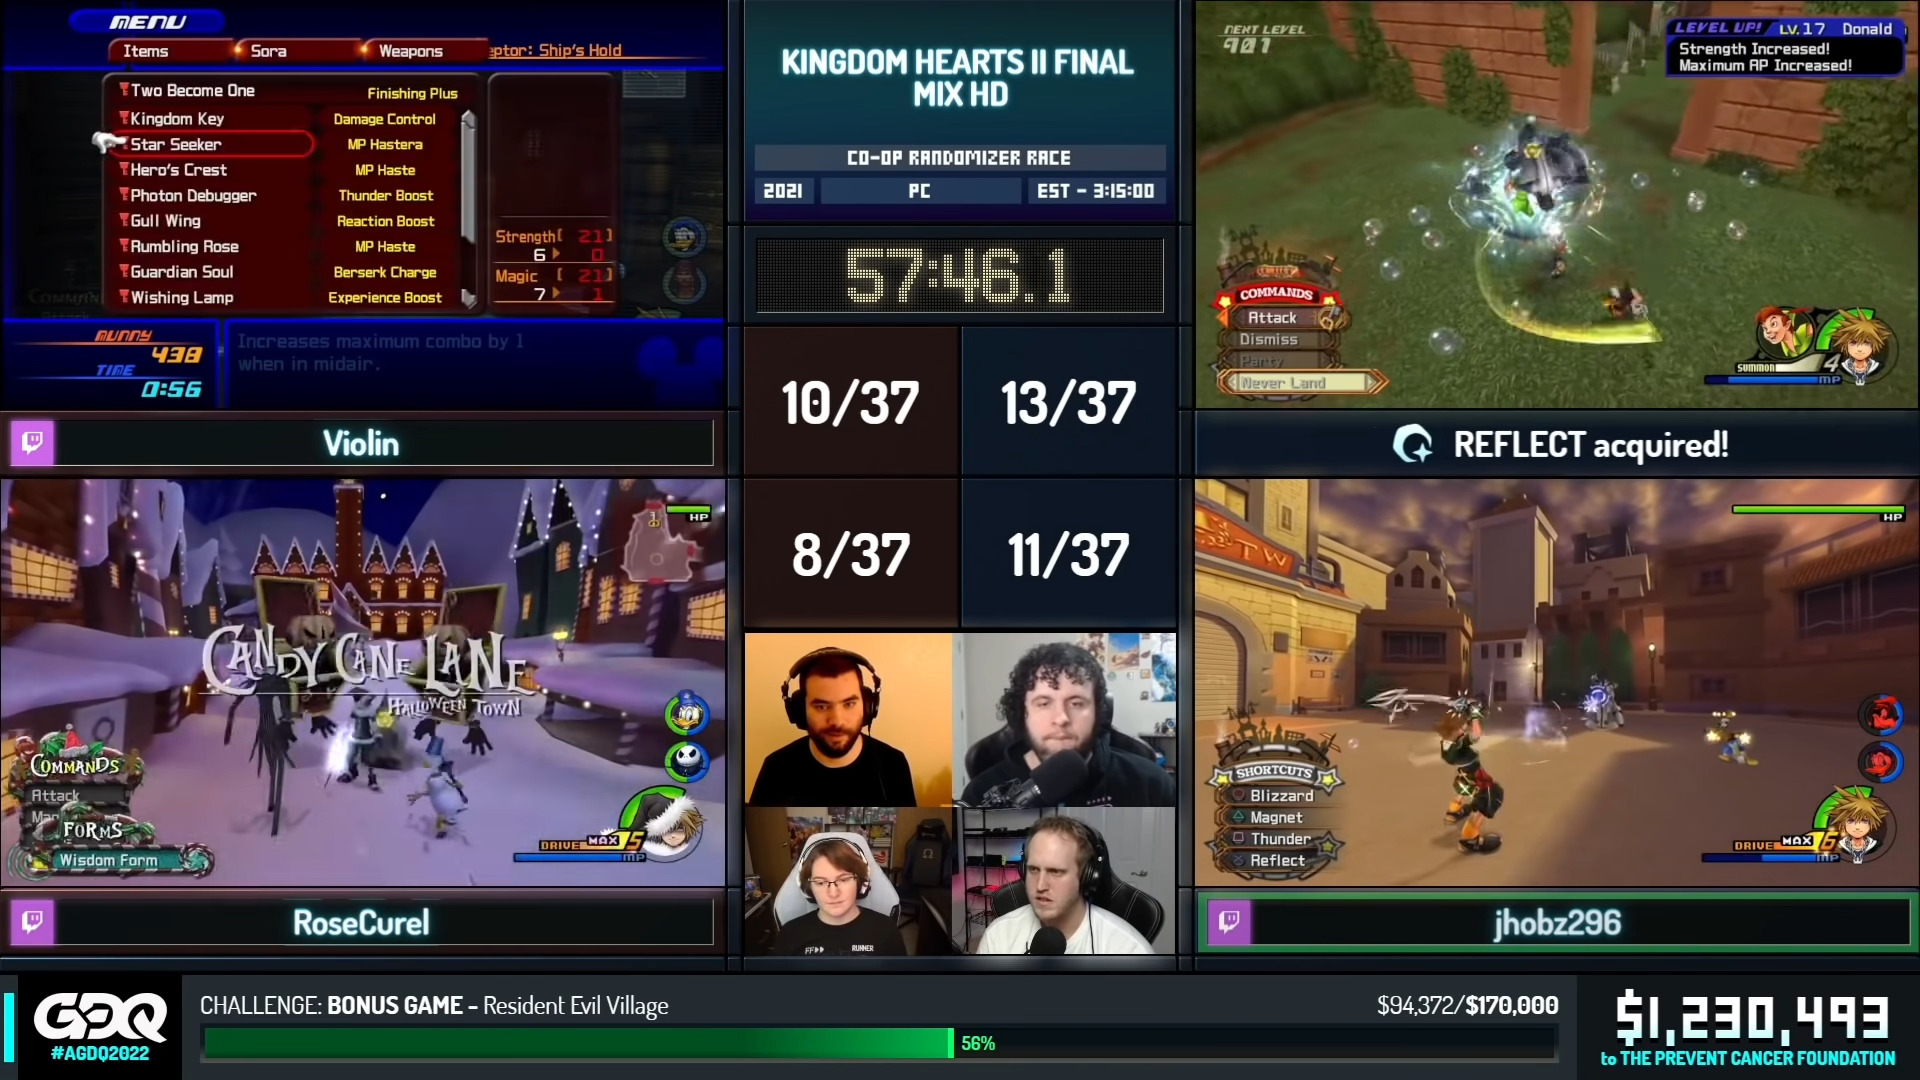 Screenshot of a GDQ broadcast showing 4 game feeds being played by 4 speedrunners, with colors coordinating teams, additional panels for item counts, other game specific information.